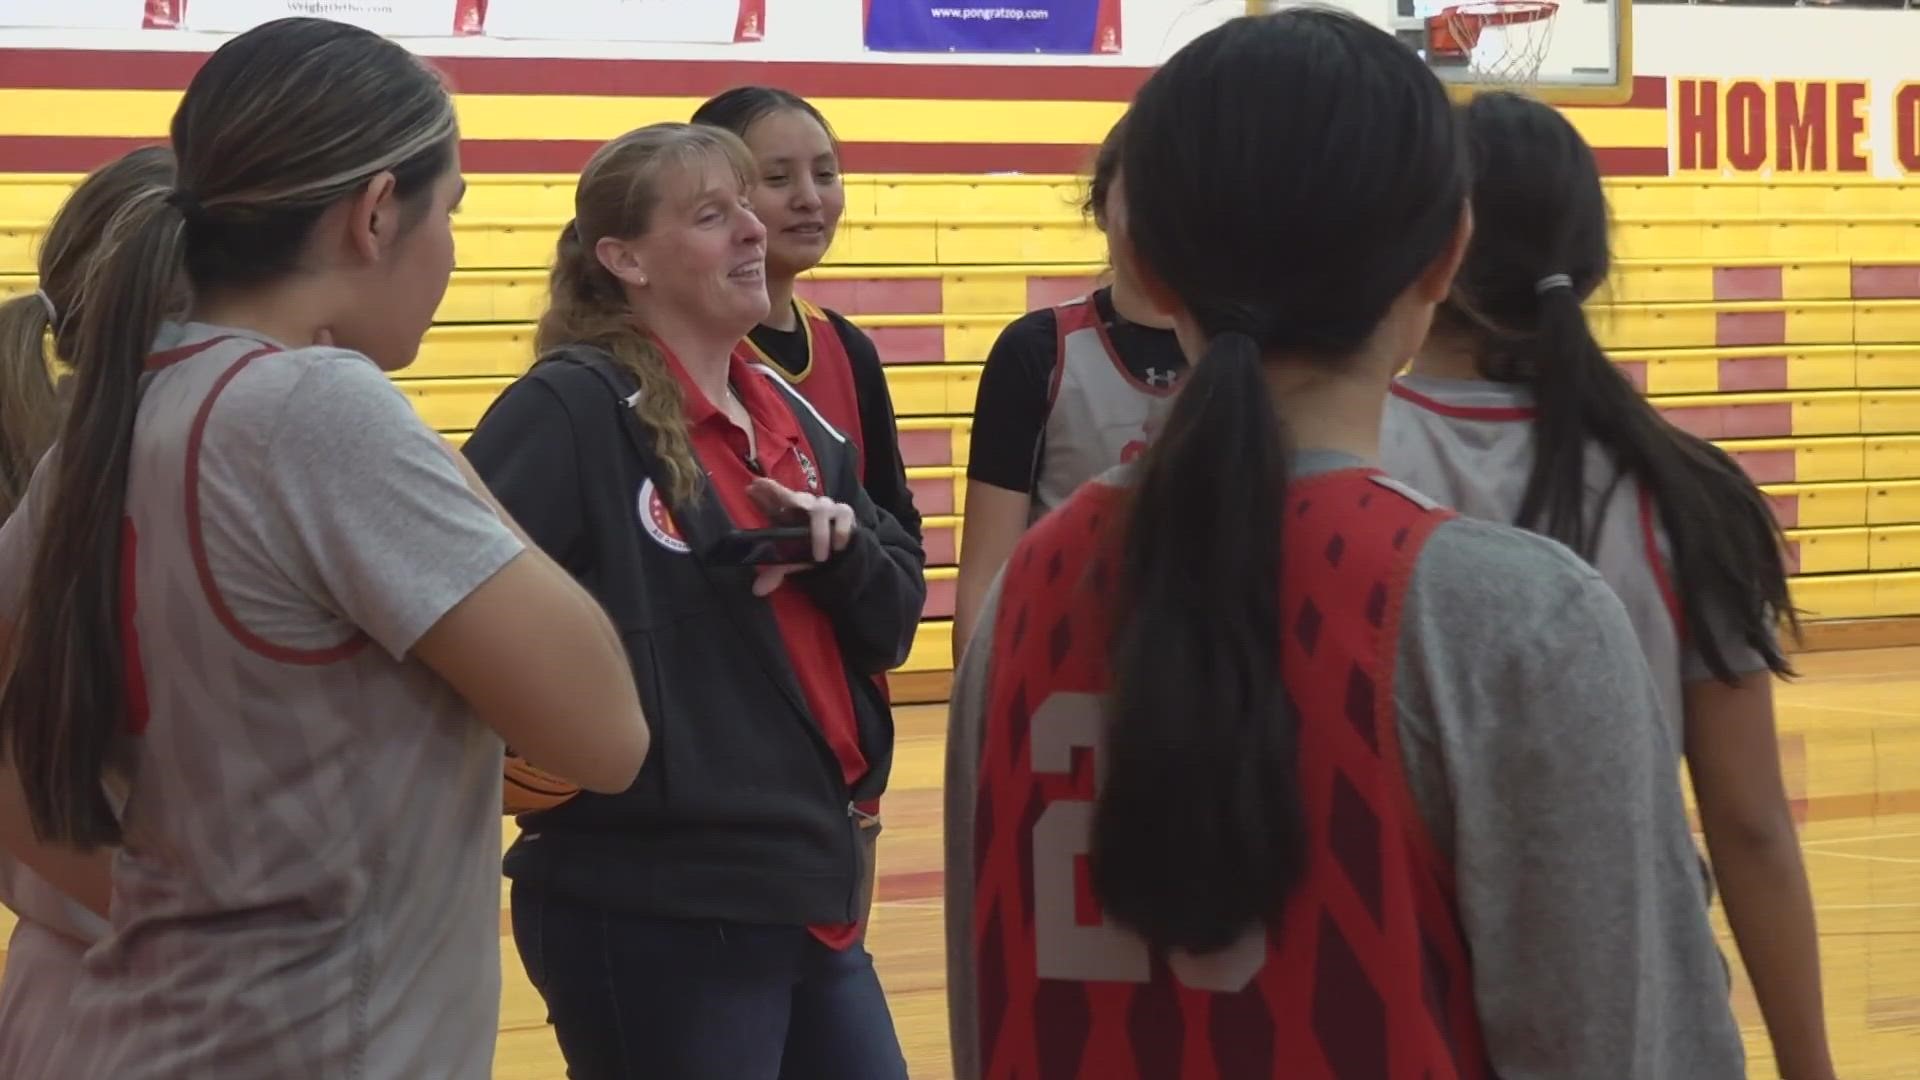 The Sentinels have won a dozen state championships under head coach Karen Self, who was recently inducted into the Arizona Sports Hall of Fame.